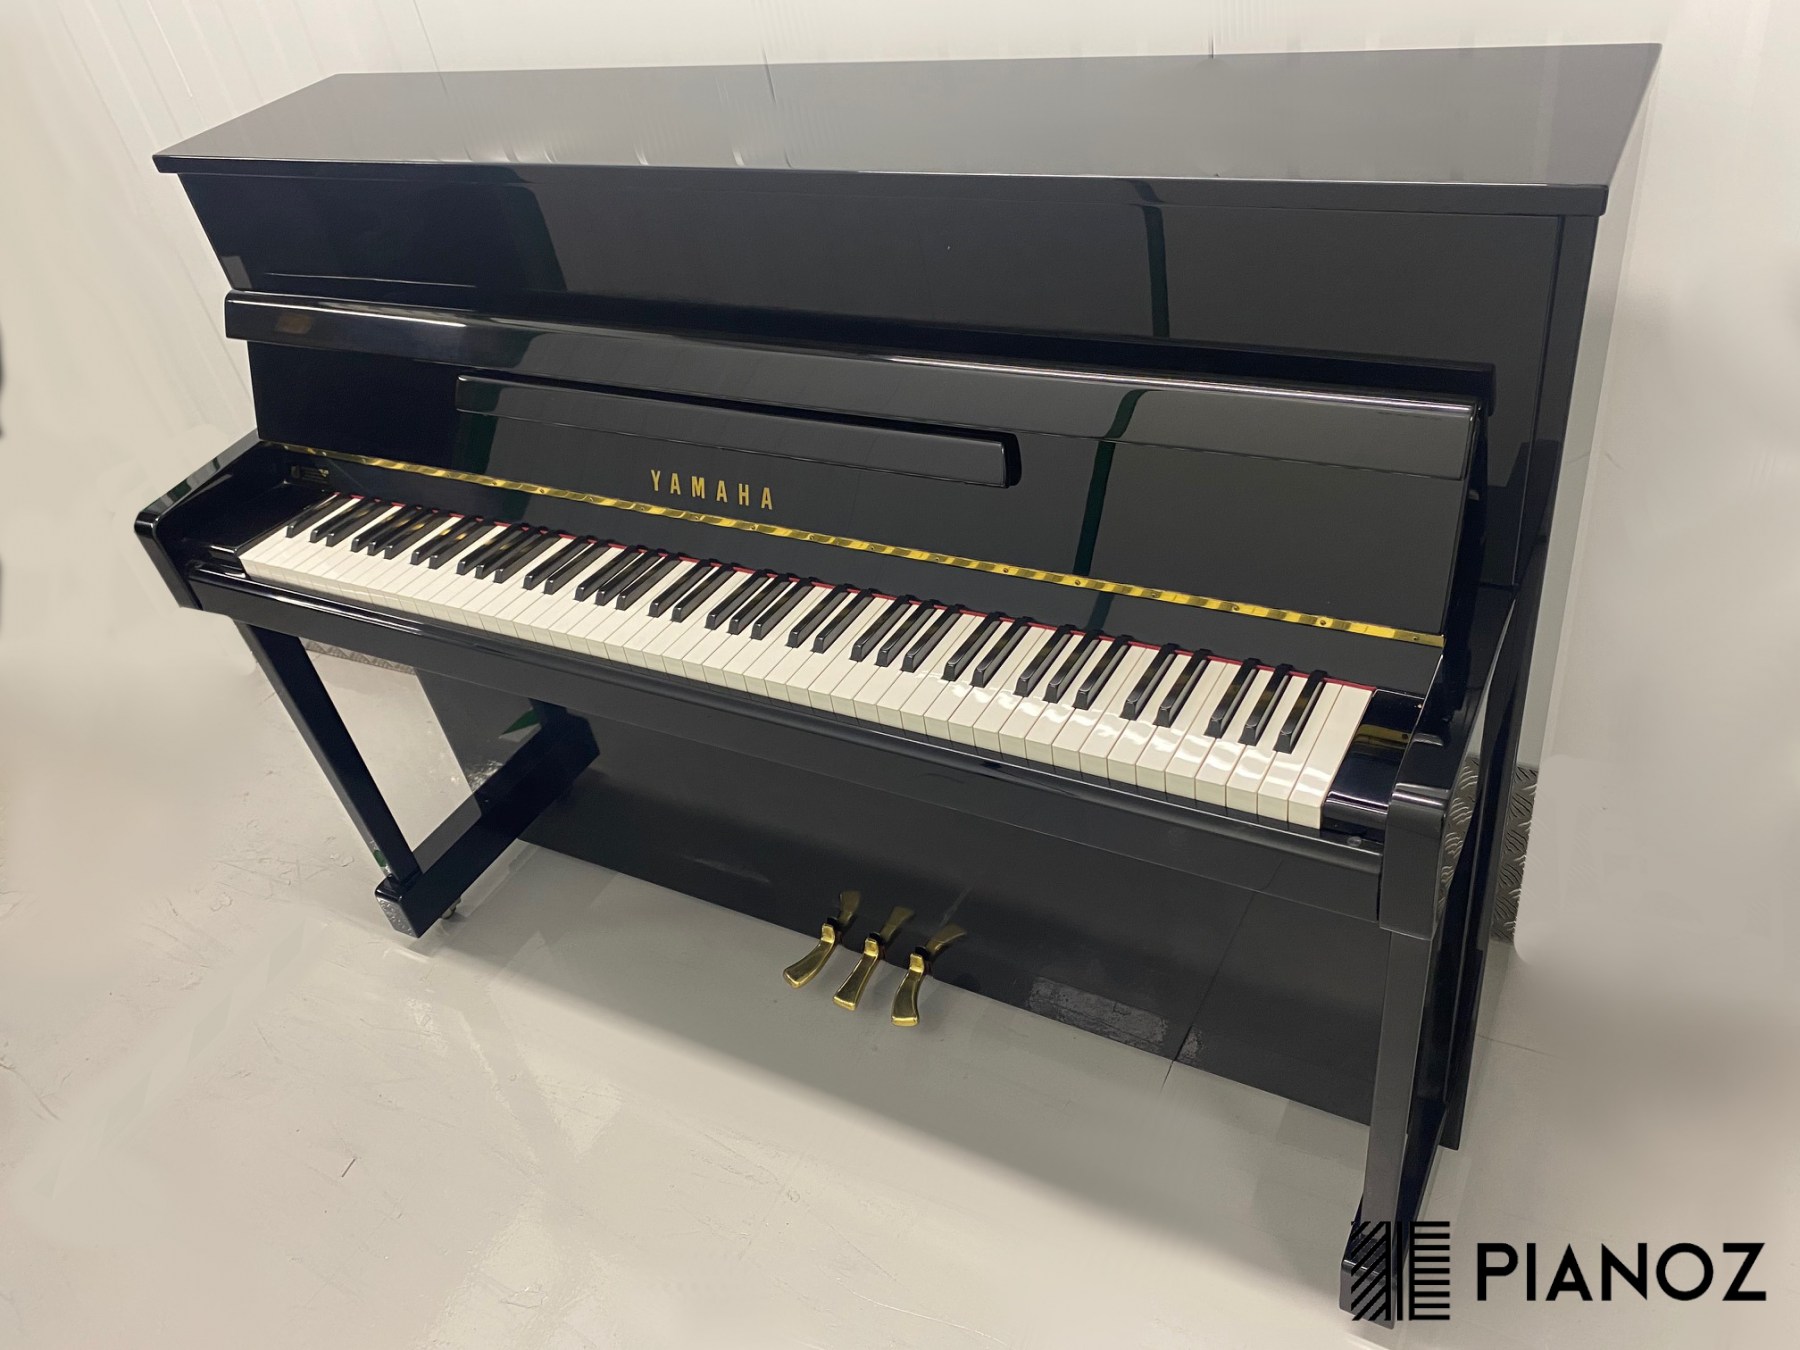 Yamaha LX110PE Upright Piano piano for sale in UK